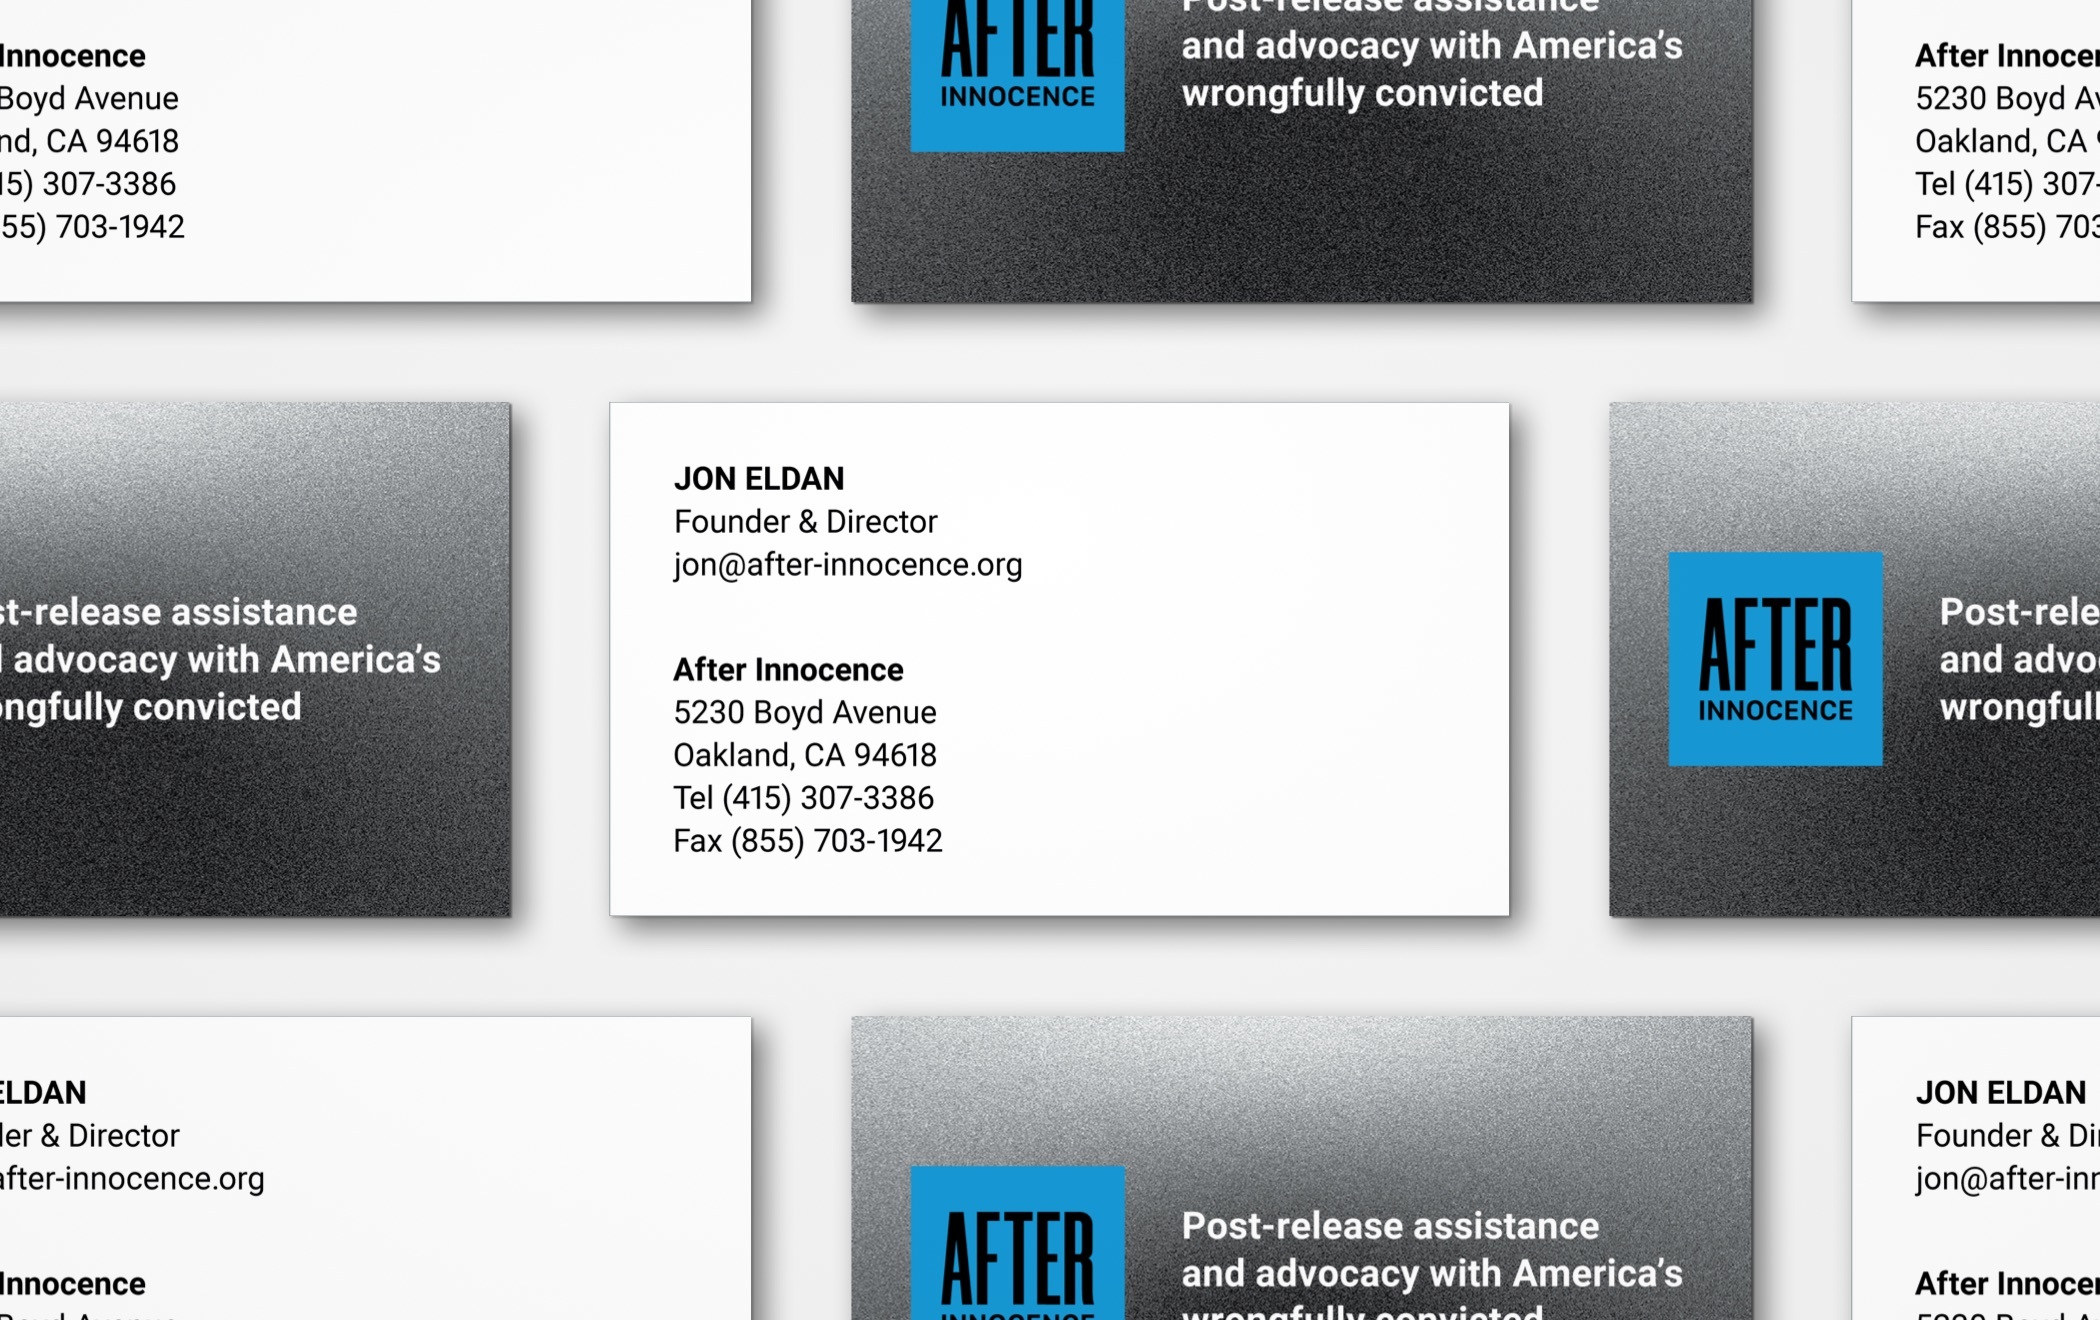 An array of After Innocence business cards featuring the organization’s logotype.